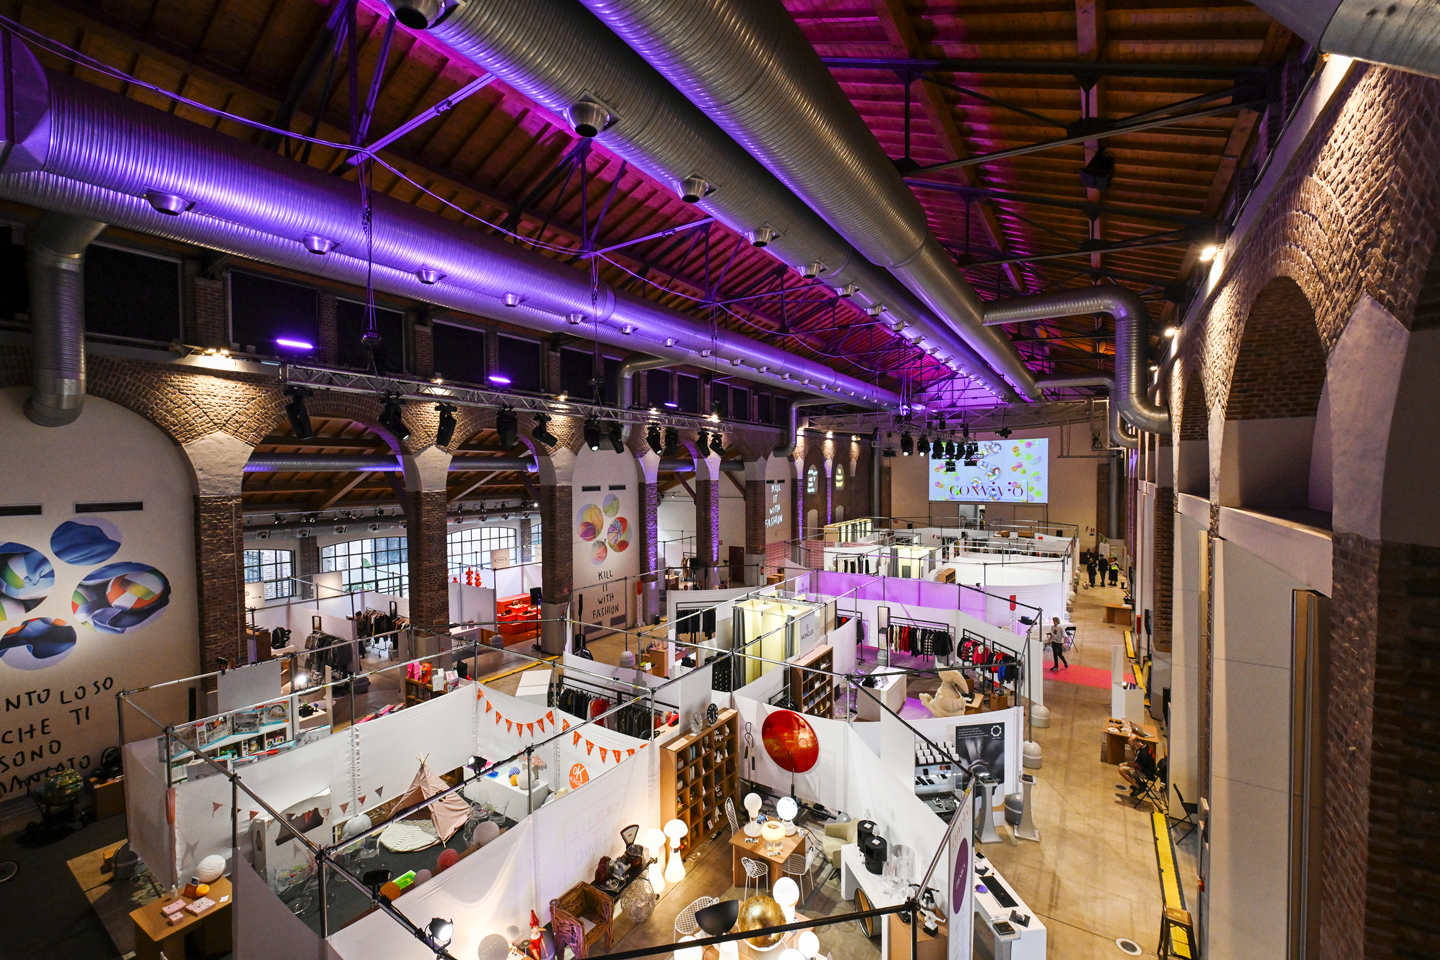 The market exhibition plays a crucial role in fundraising. This year, design, fashion, accessories, beauty and food companies donated around 10,000 products